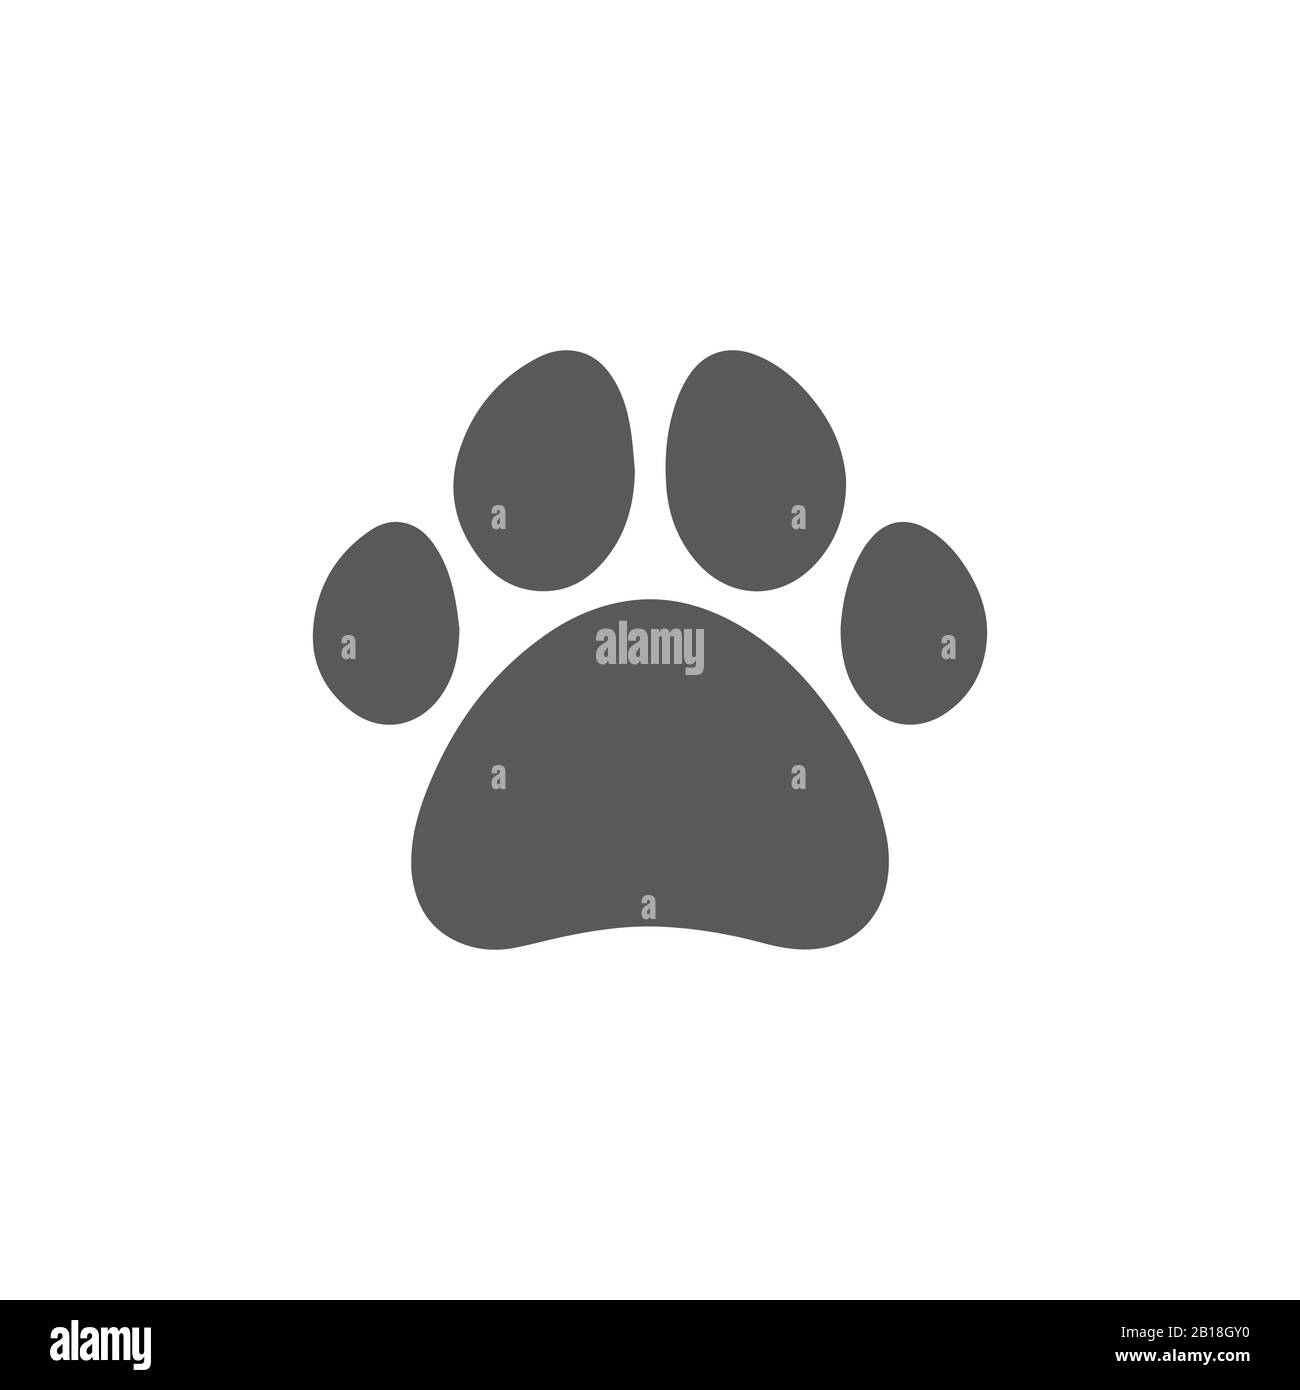 Paw icon on white background Stock Vector